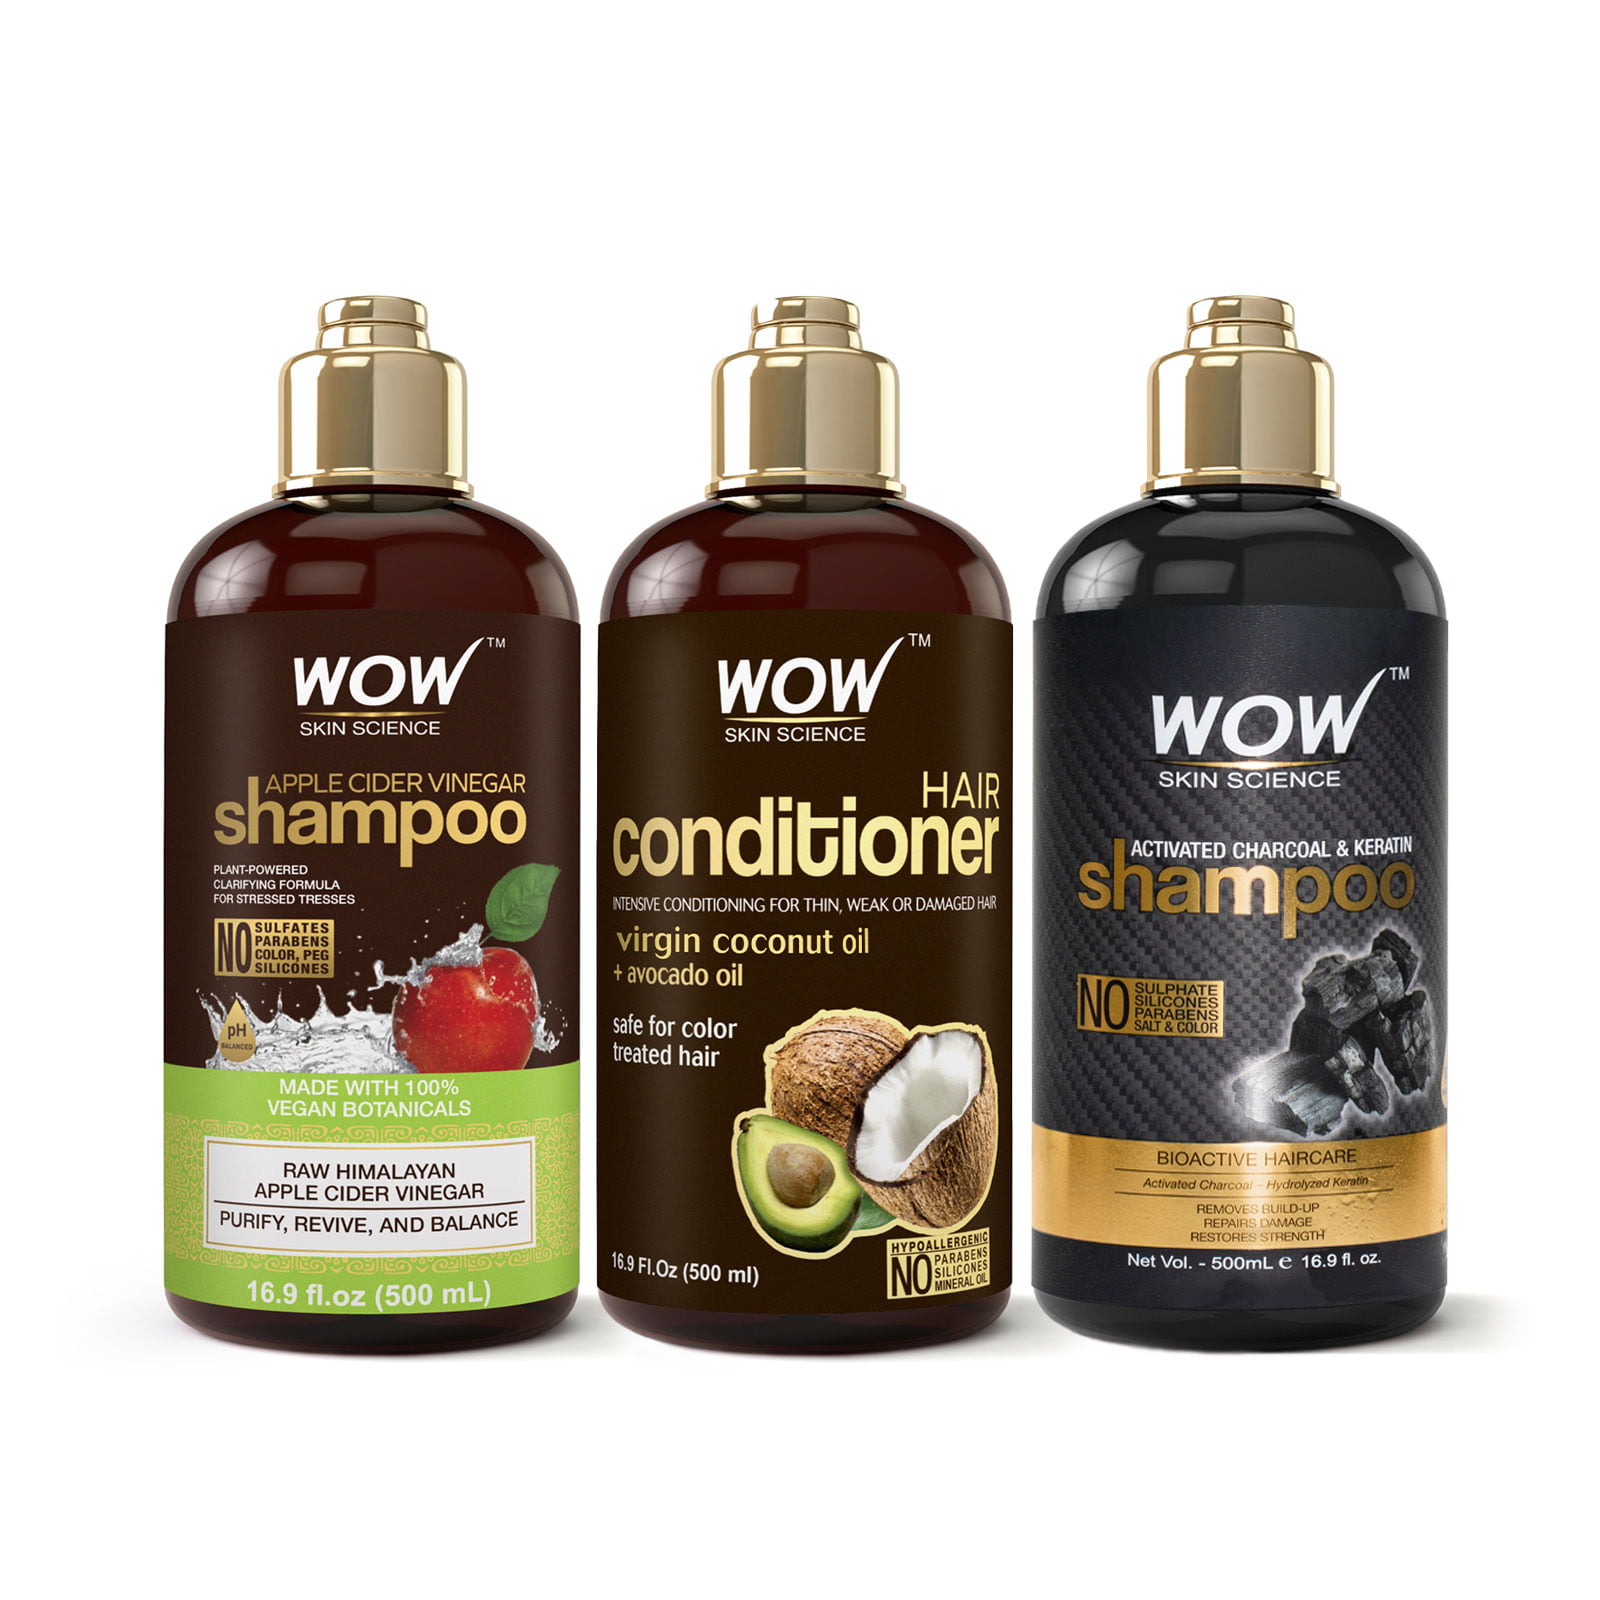 WOW Skin Science Apple Cider Vinegar Shampoo and Coconut Avocado Hair  Conditioner with Charcoal Shampoo (3x 500ml) 